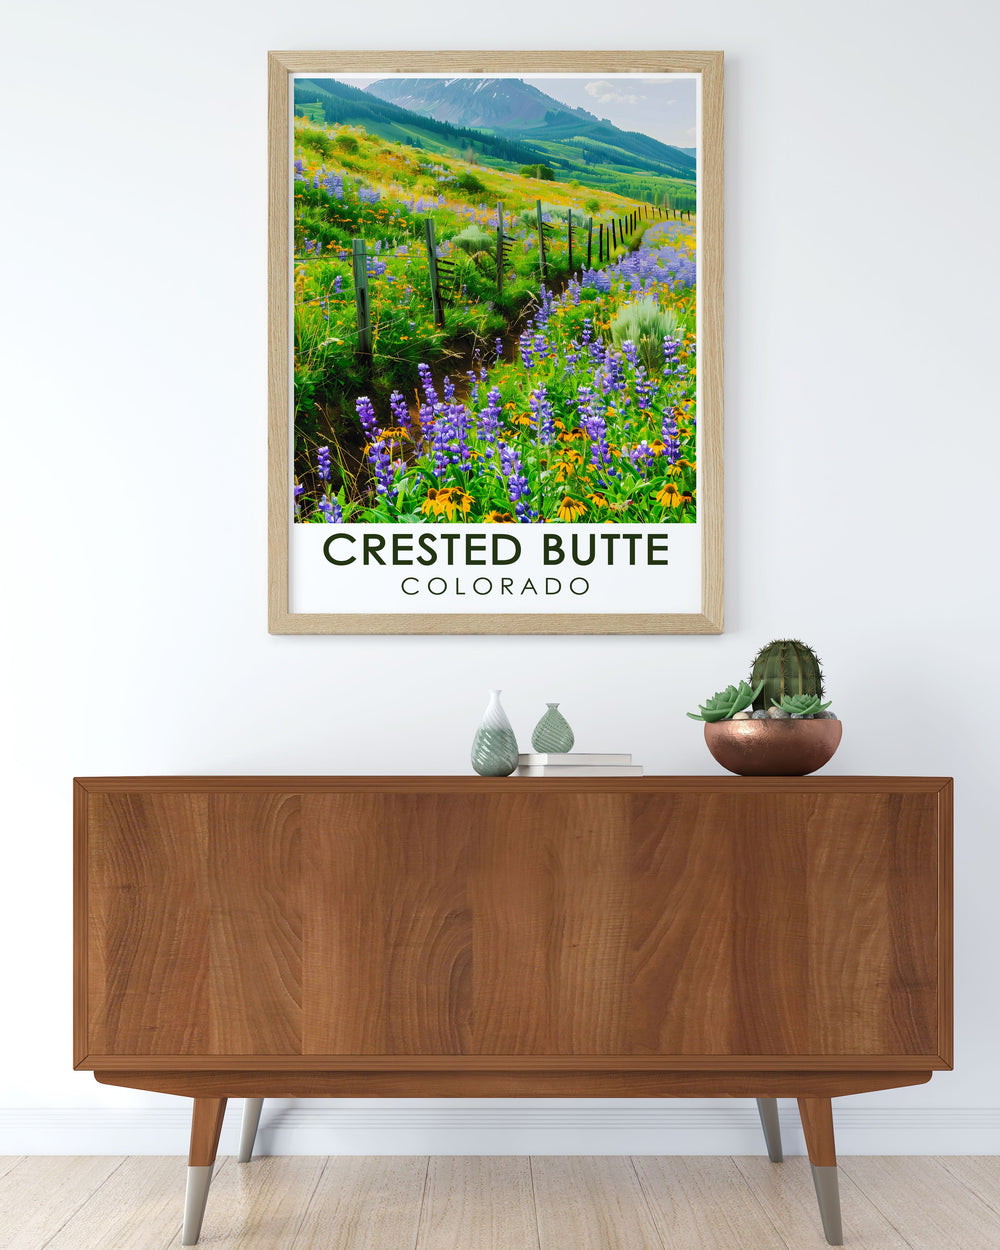 Beautiful Colorado Art Print featuring the Wildflower Festival in Crested Butte highlighting the colorful blooms and breathtaking mountain views ideal for enhancing your Colorado wall art collection with a touch of nature.